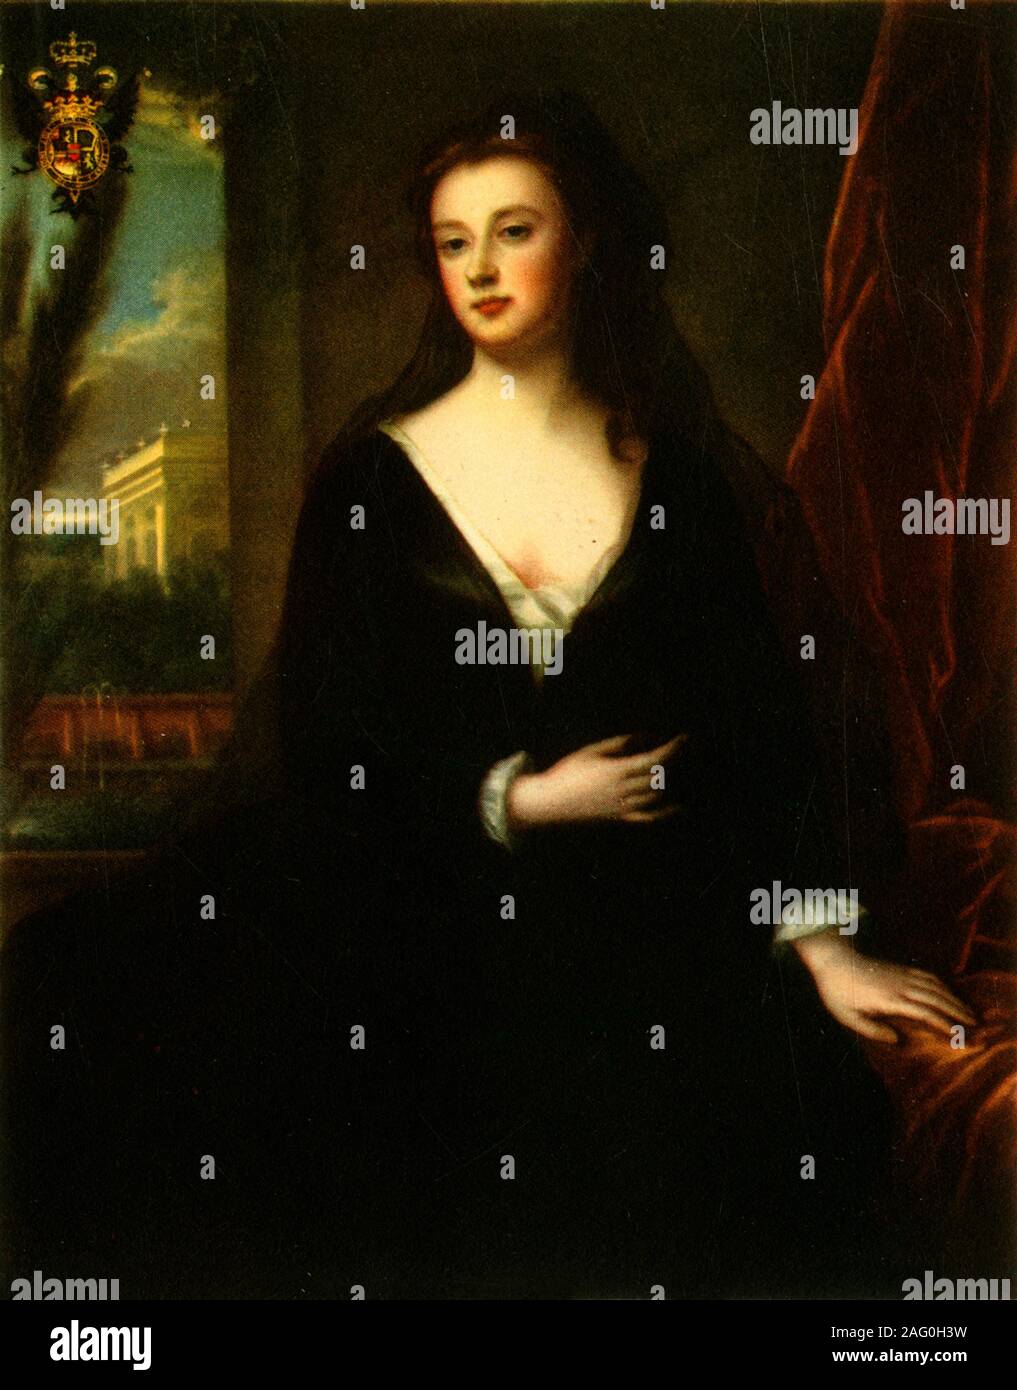 'Sarah Jennings, Duchess of Marlborough', c1680, (1942). Portrait of English aristocrat Sarah Churchill, Duchess of Marlborough (1660-1744). The Duchess was appointed lady of the bedchamber to Queen Anne and became a close confidante and favourite. After the death of her husband, she built Blenheim Palace. After a painting made late 17th century. From &quot;English Women&quot;, by Edith Sitwell. [Collins, London, 1942] Stock Photo